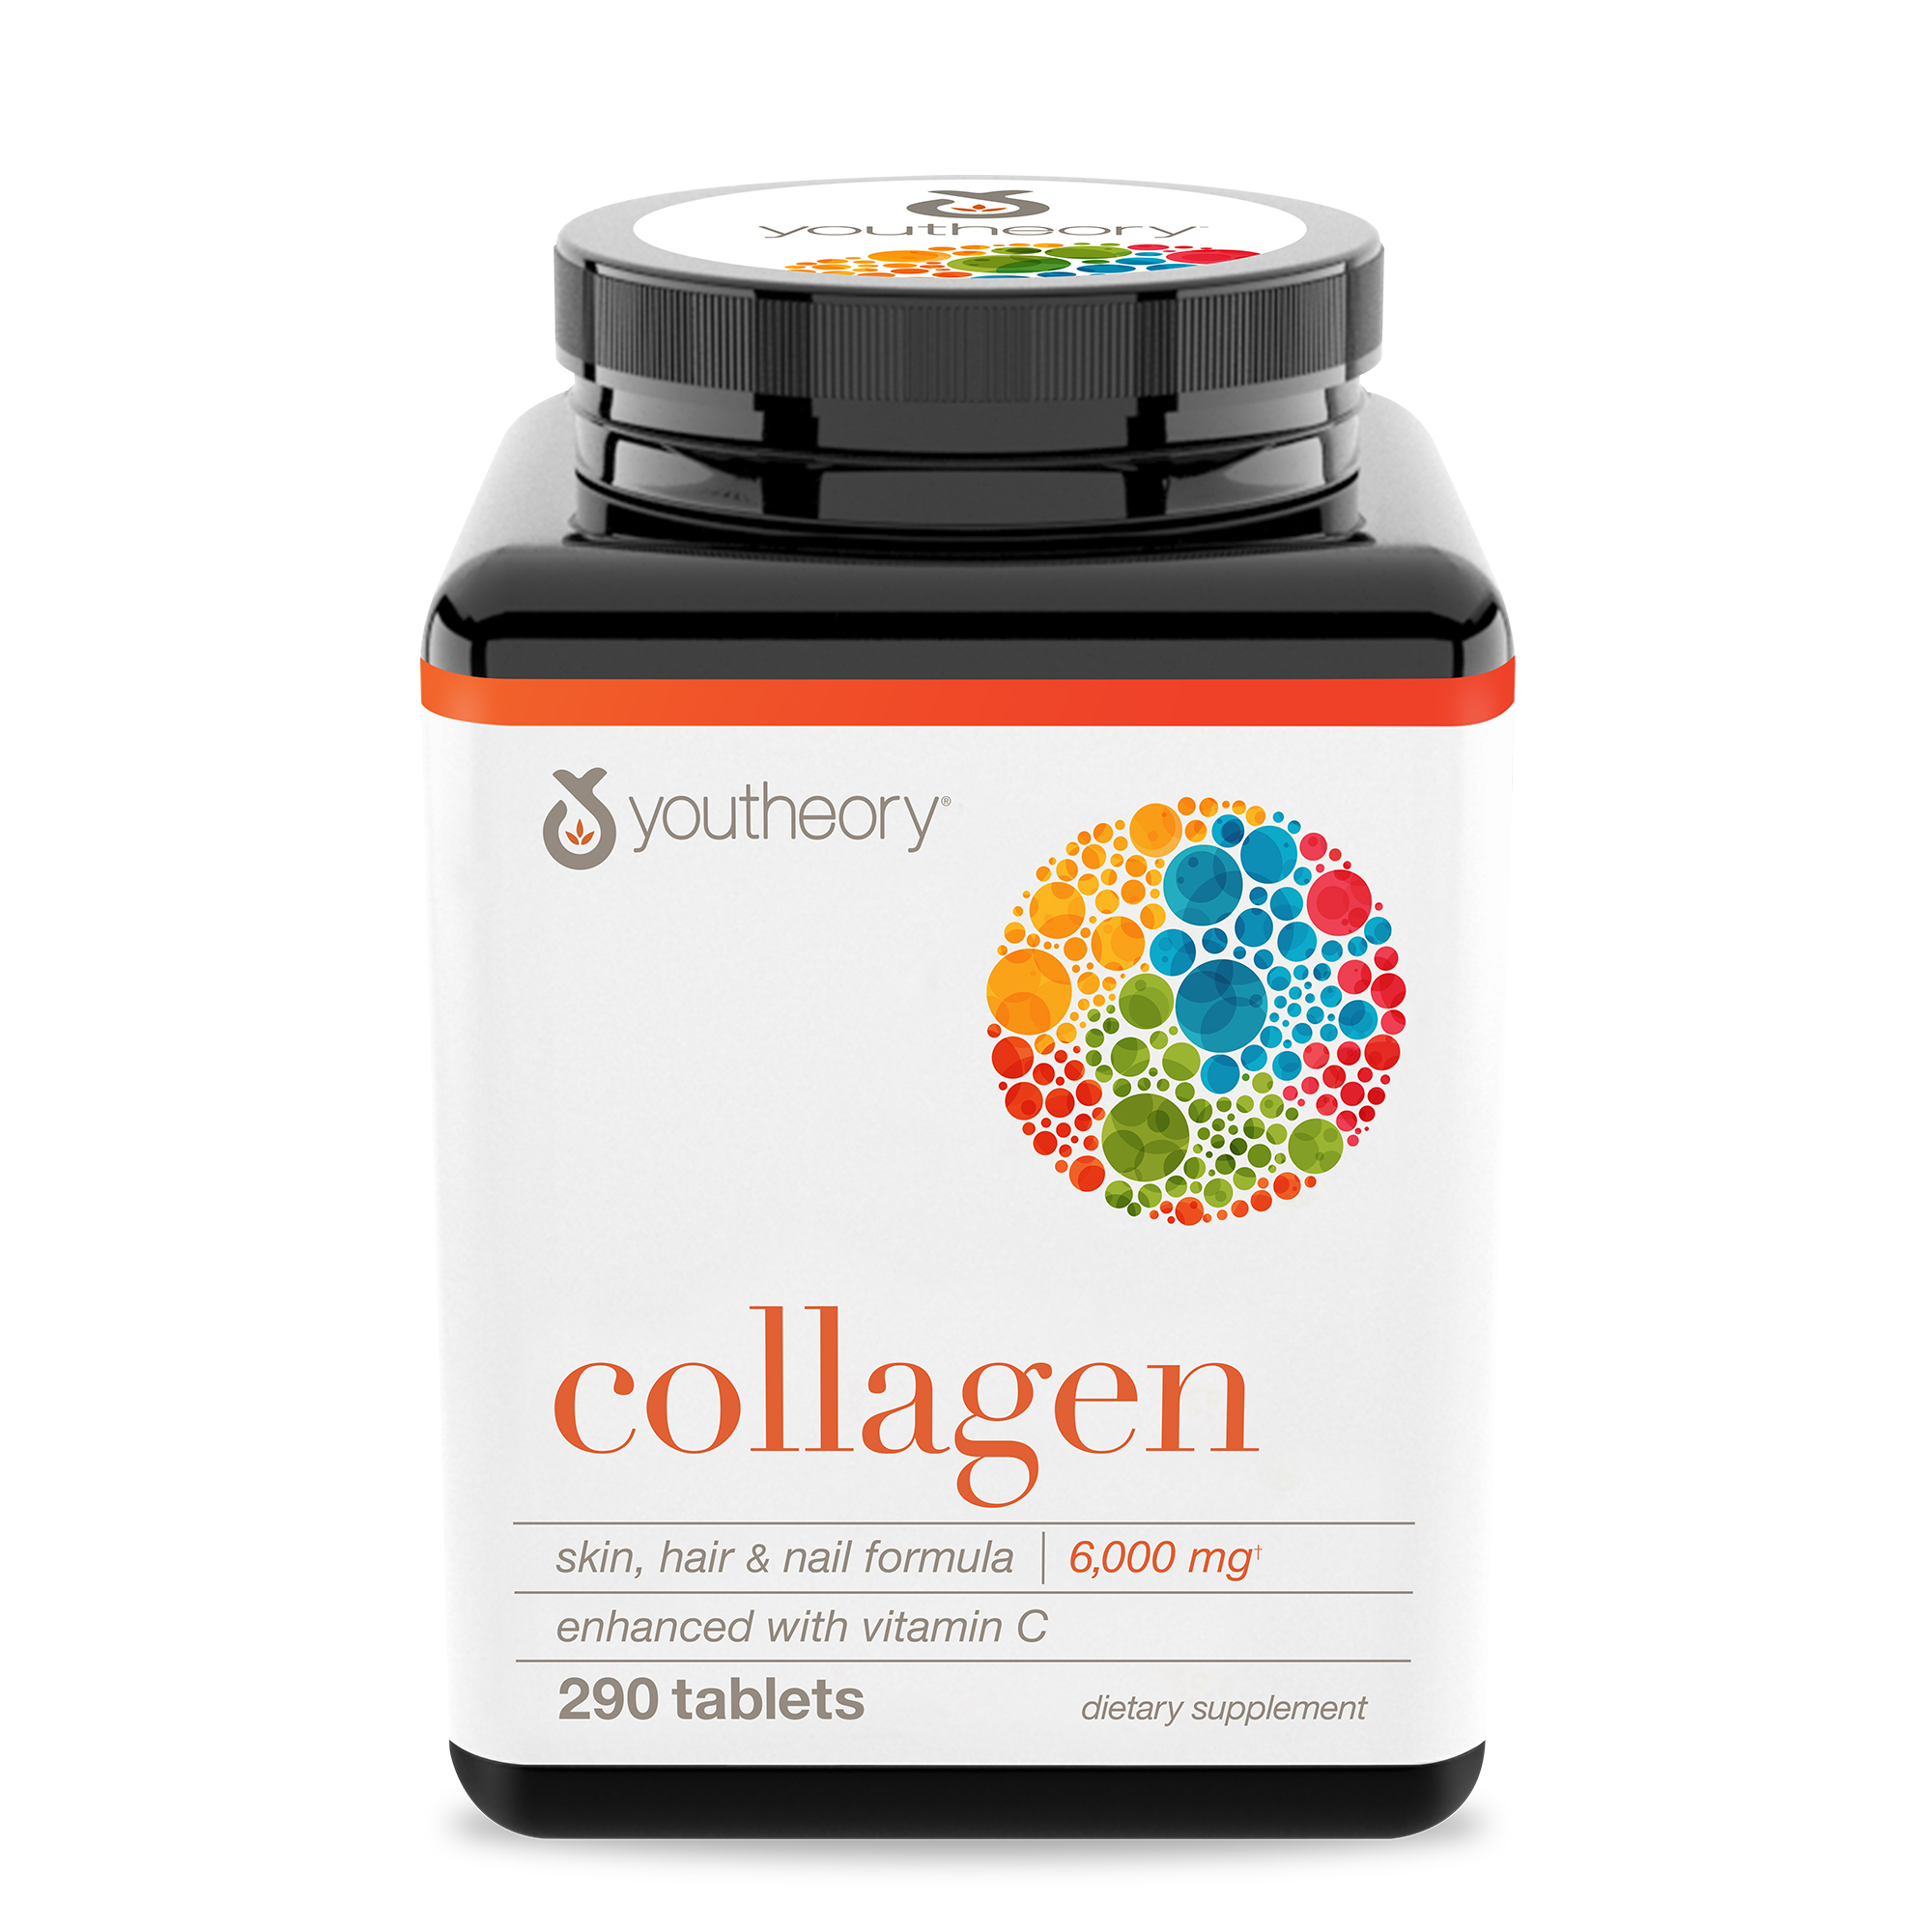 Youtheory коллаген 6000 мг. Collagen 6000mg. Marine Collagen Youtheory 1 3.